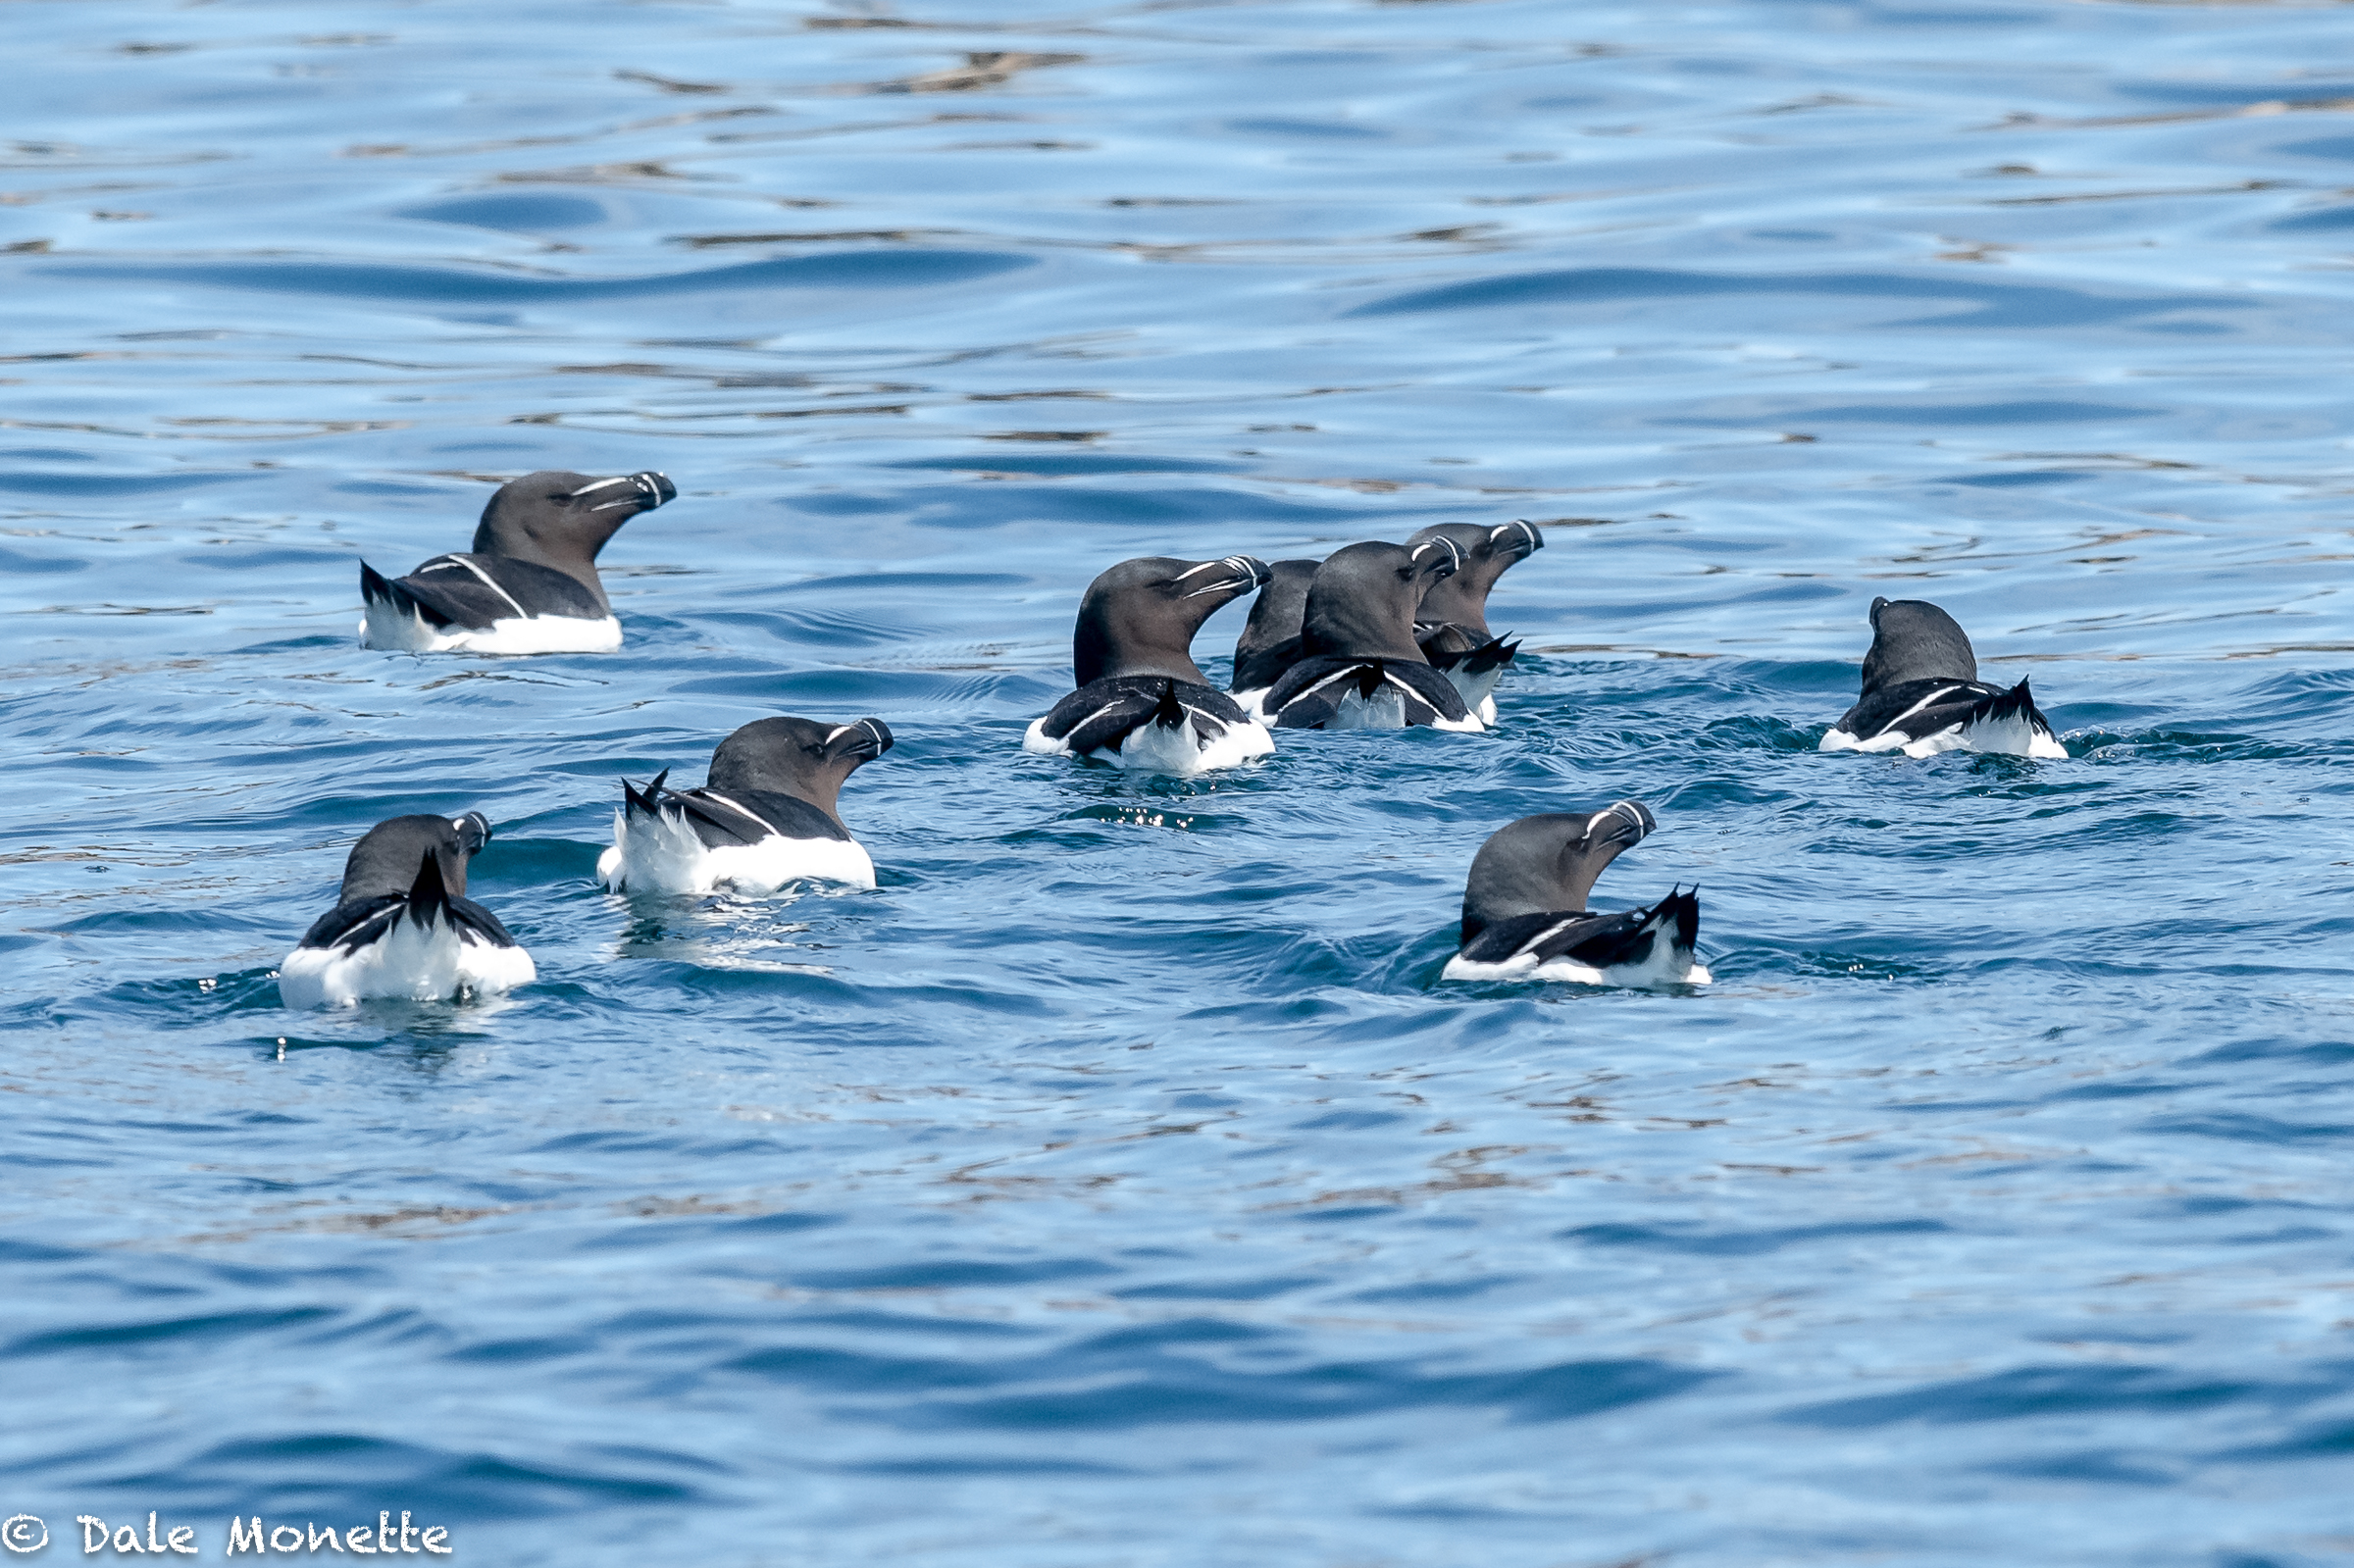   Here are a few razor billed auks in an image taken last week off of the Bird Islands on the shore of Cape Breton Island. These birds are related to penguins and only come to land to nest and raise the young. Then they fly back out to sea. Sharp loo